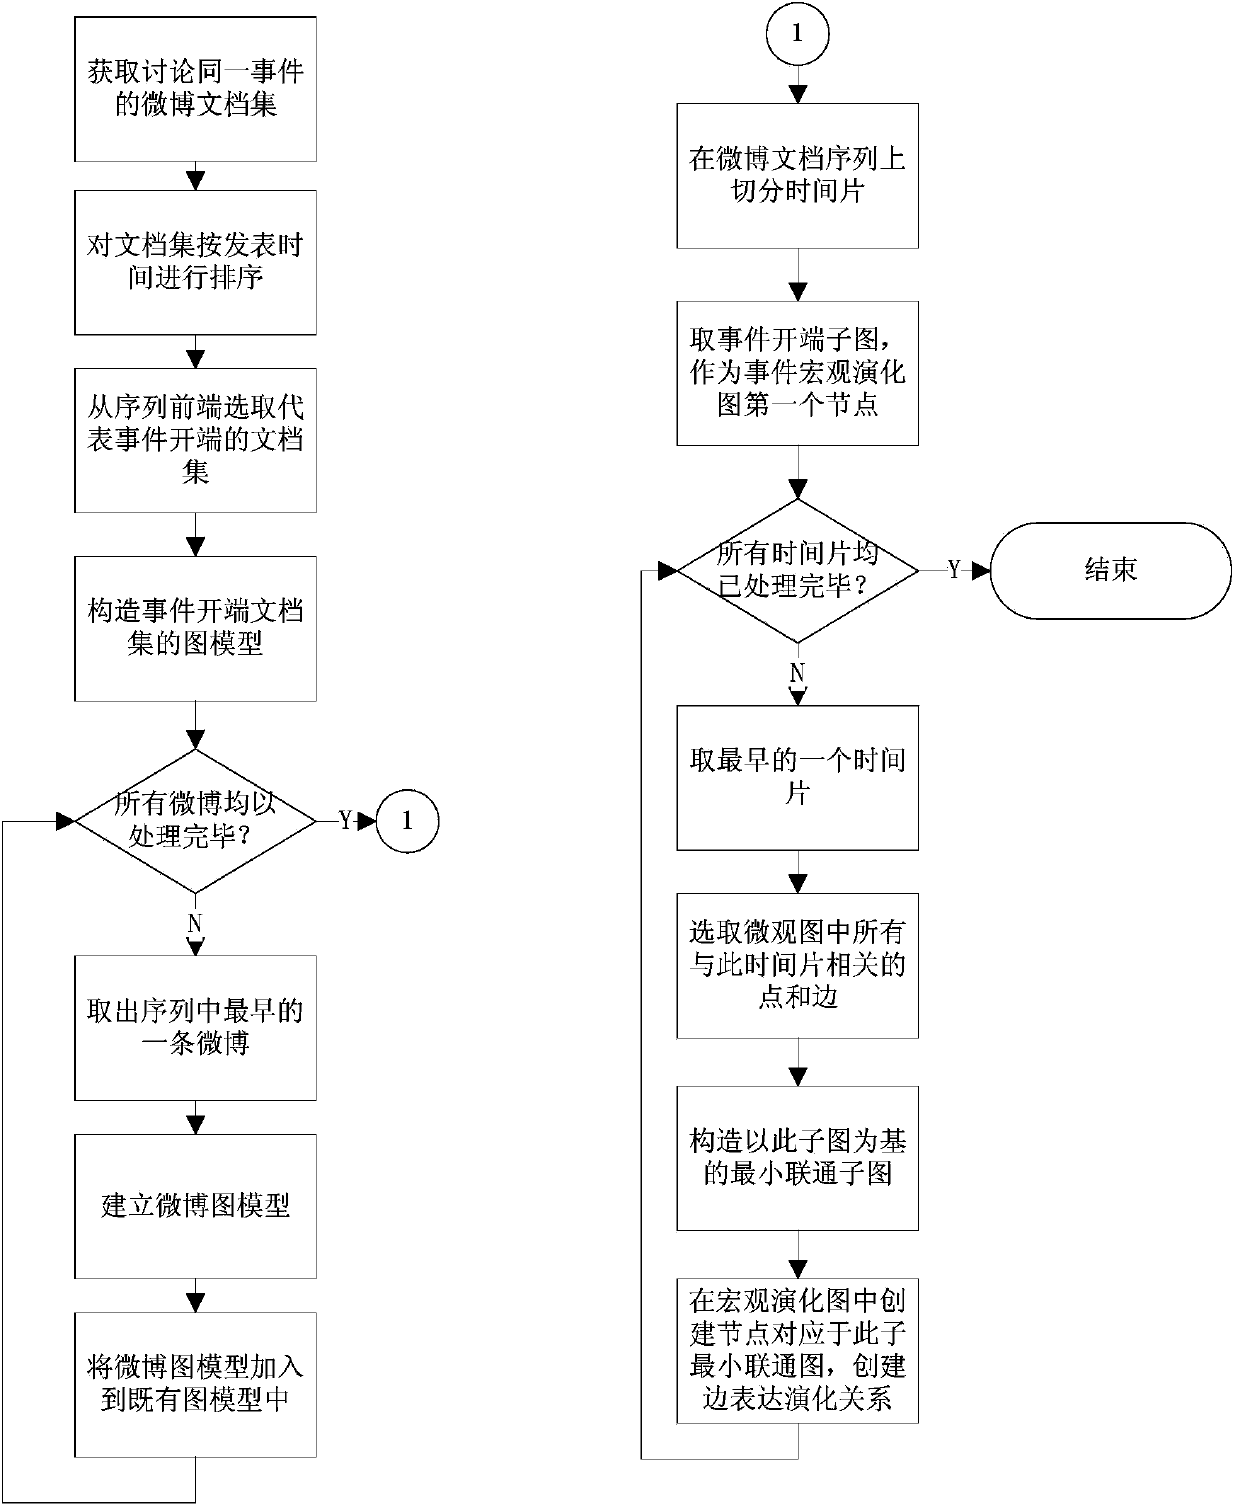 Event characteristic evolution excavation method and system based on microblogs